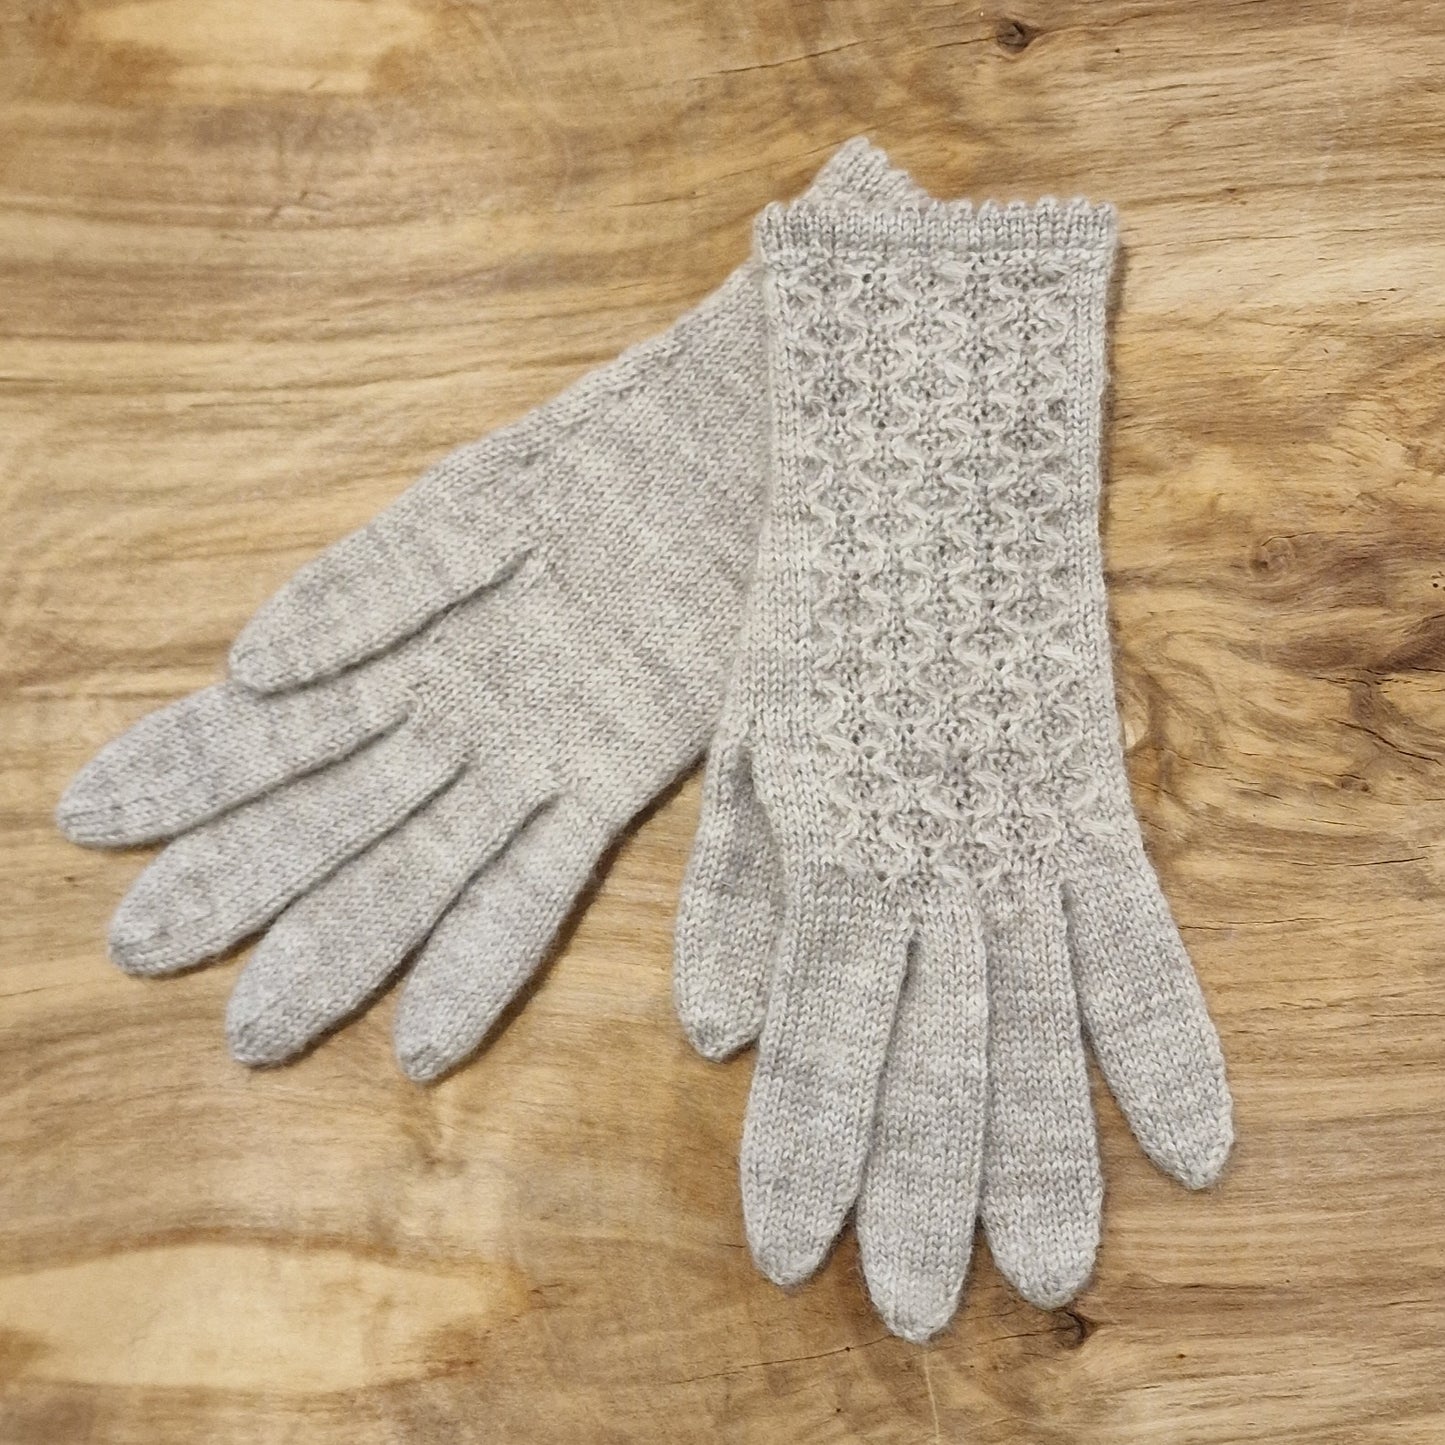 Hand-knitted light sand-colored mittens (INVA 29)